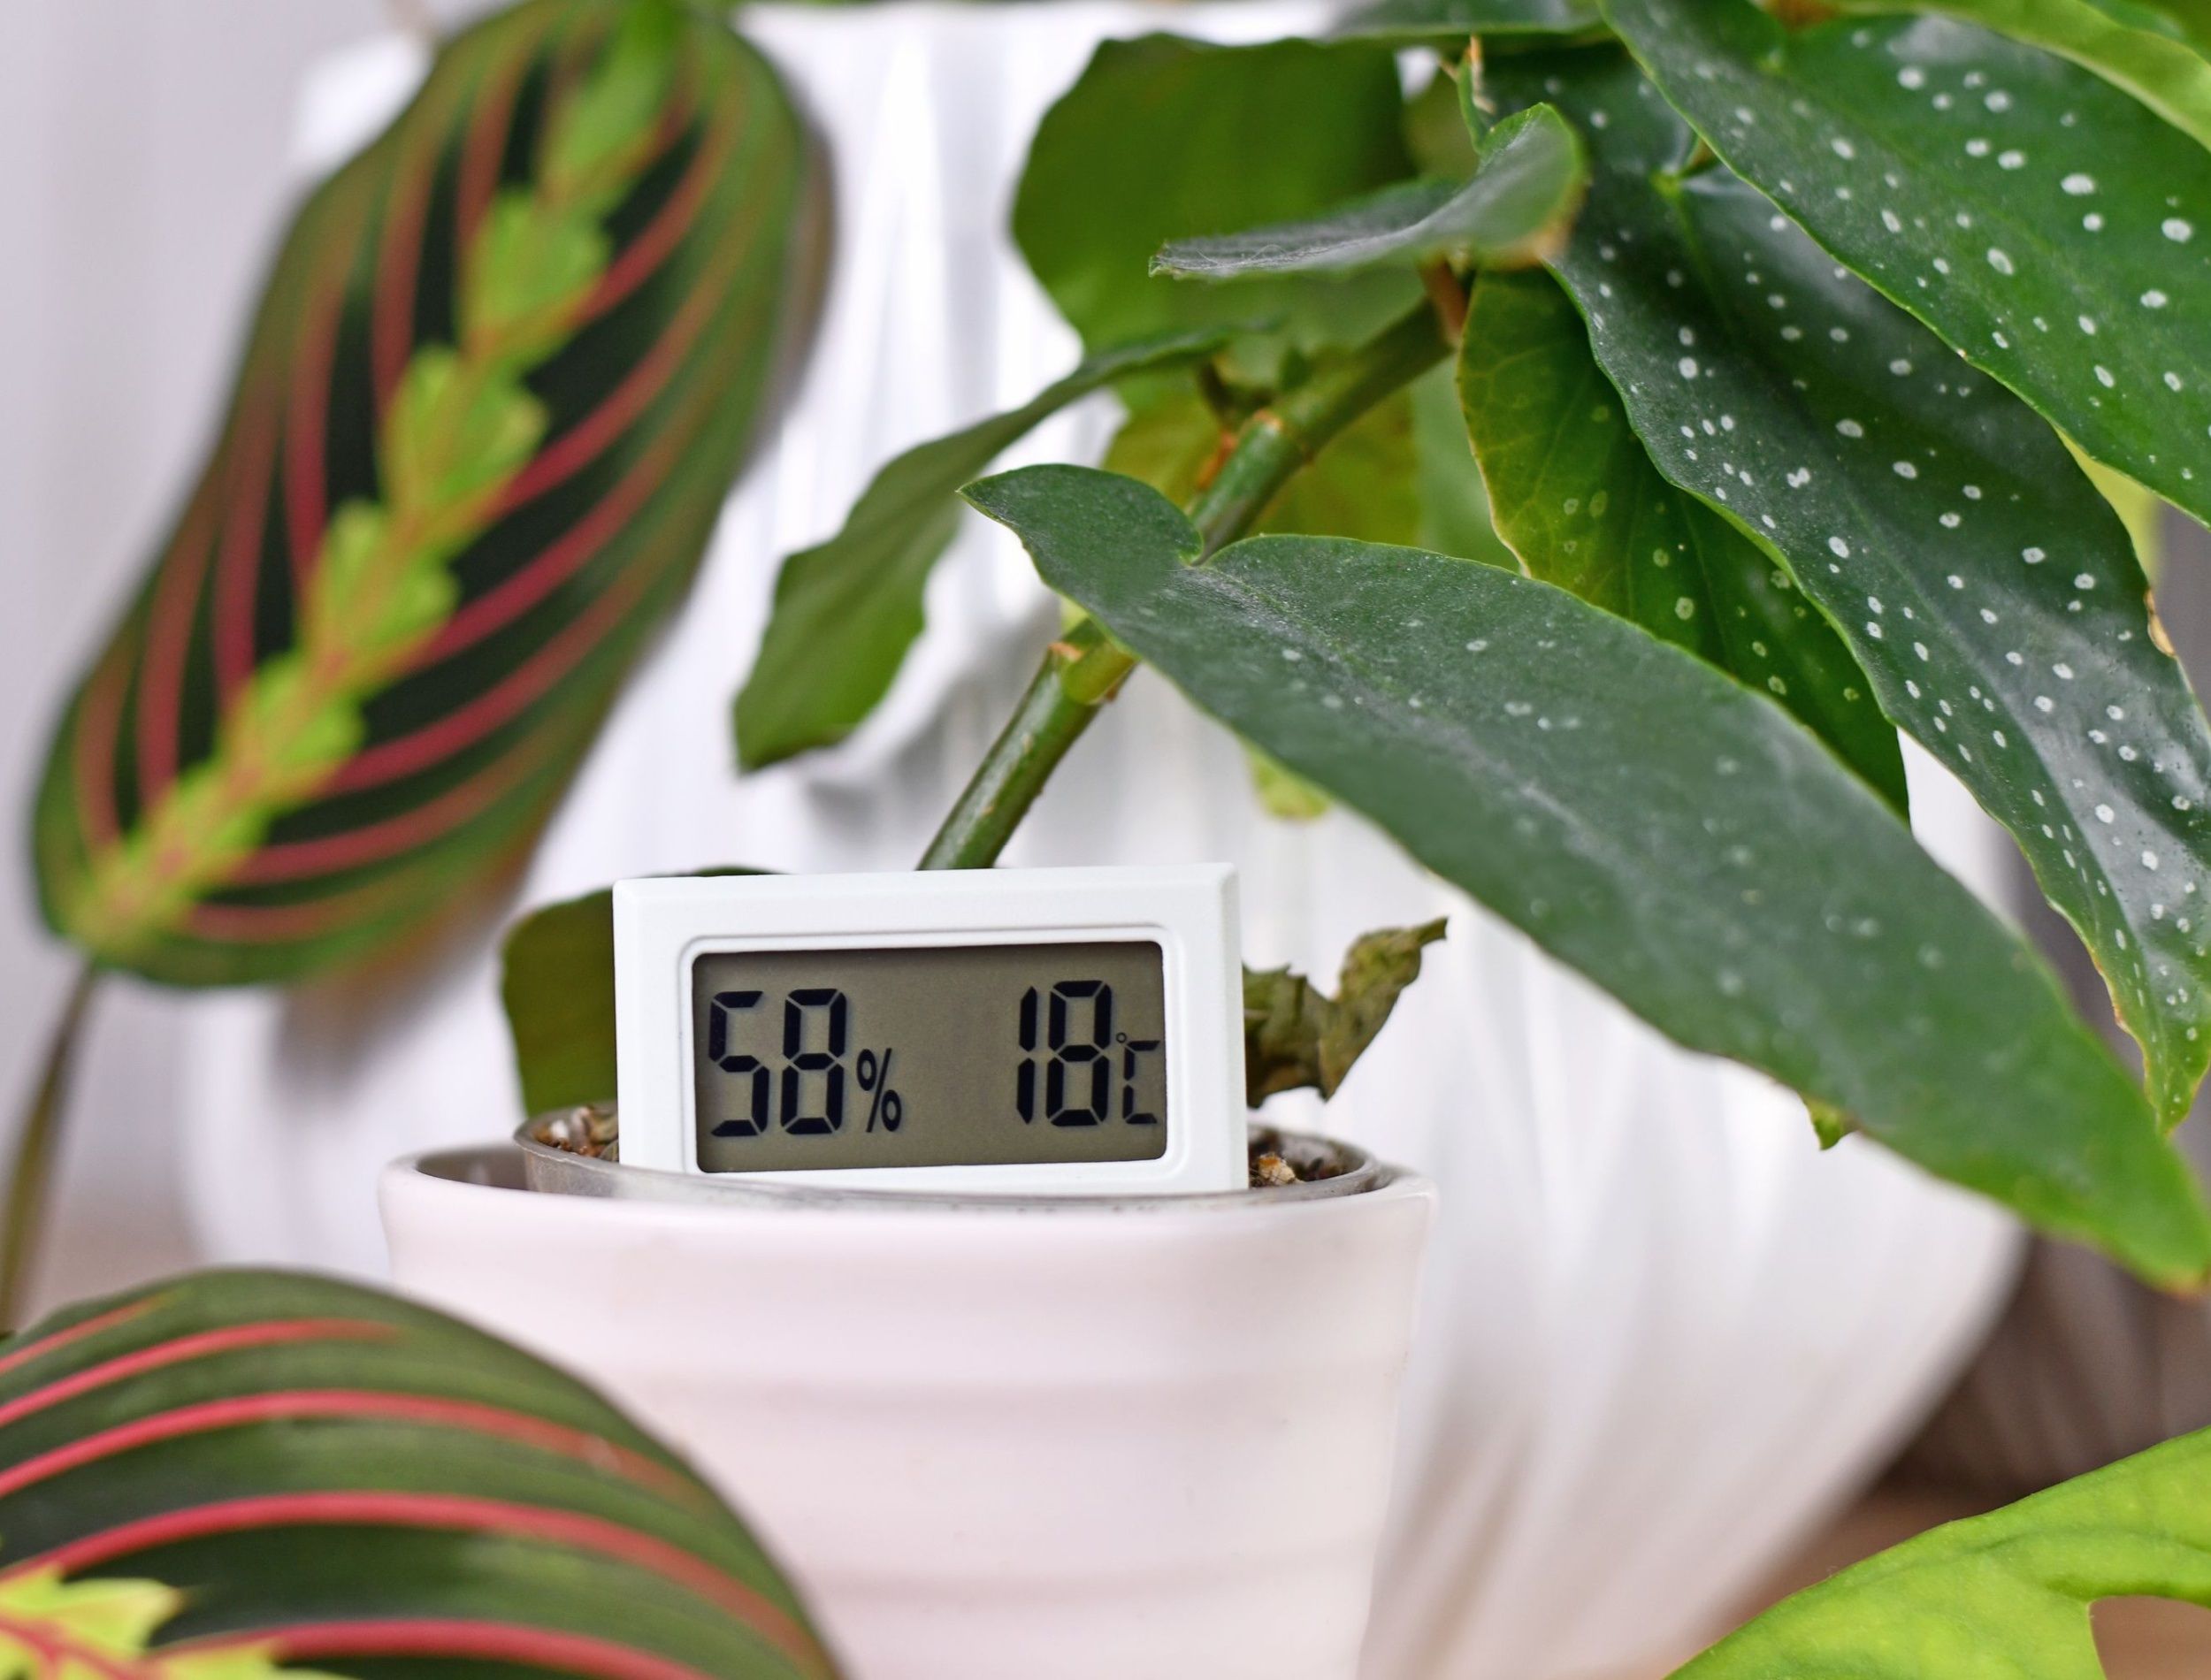 thermostat and plants for temperature